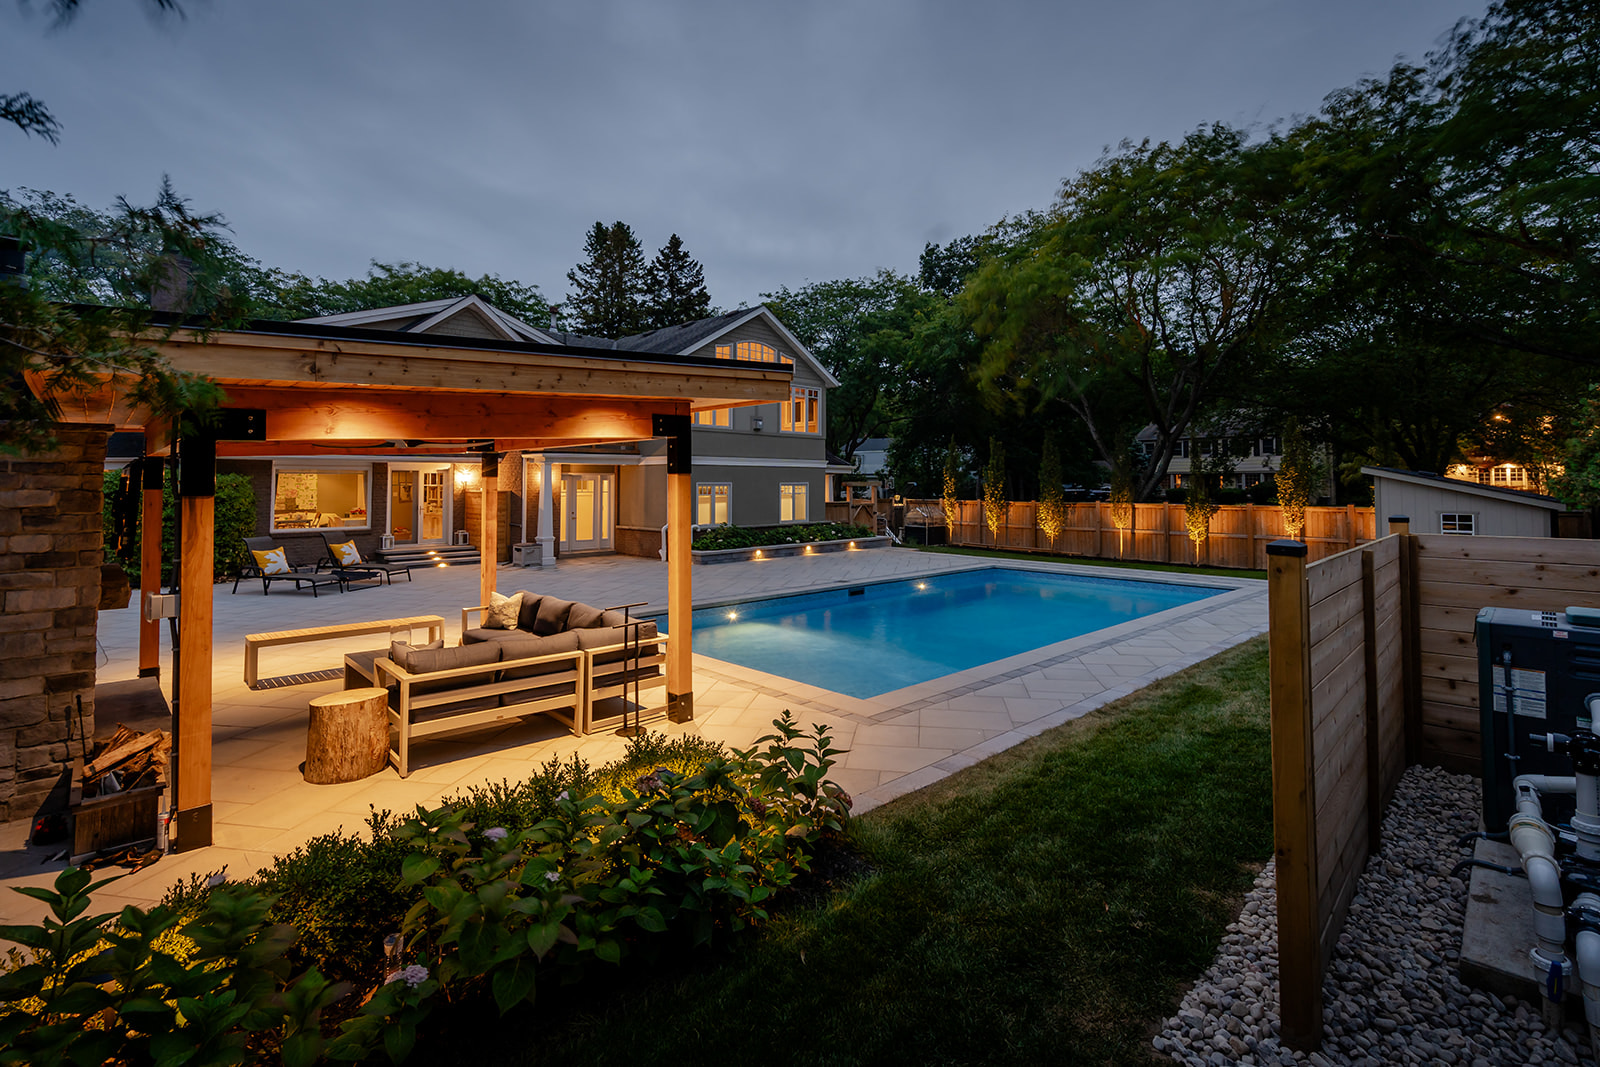 A backyard with an inground pool and lights on in the gazebo.